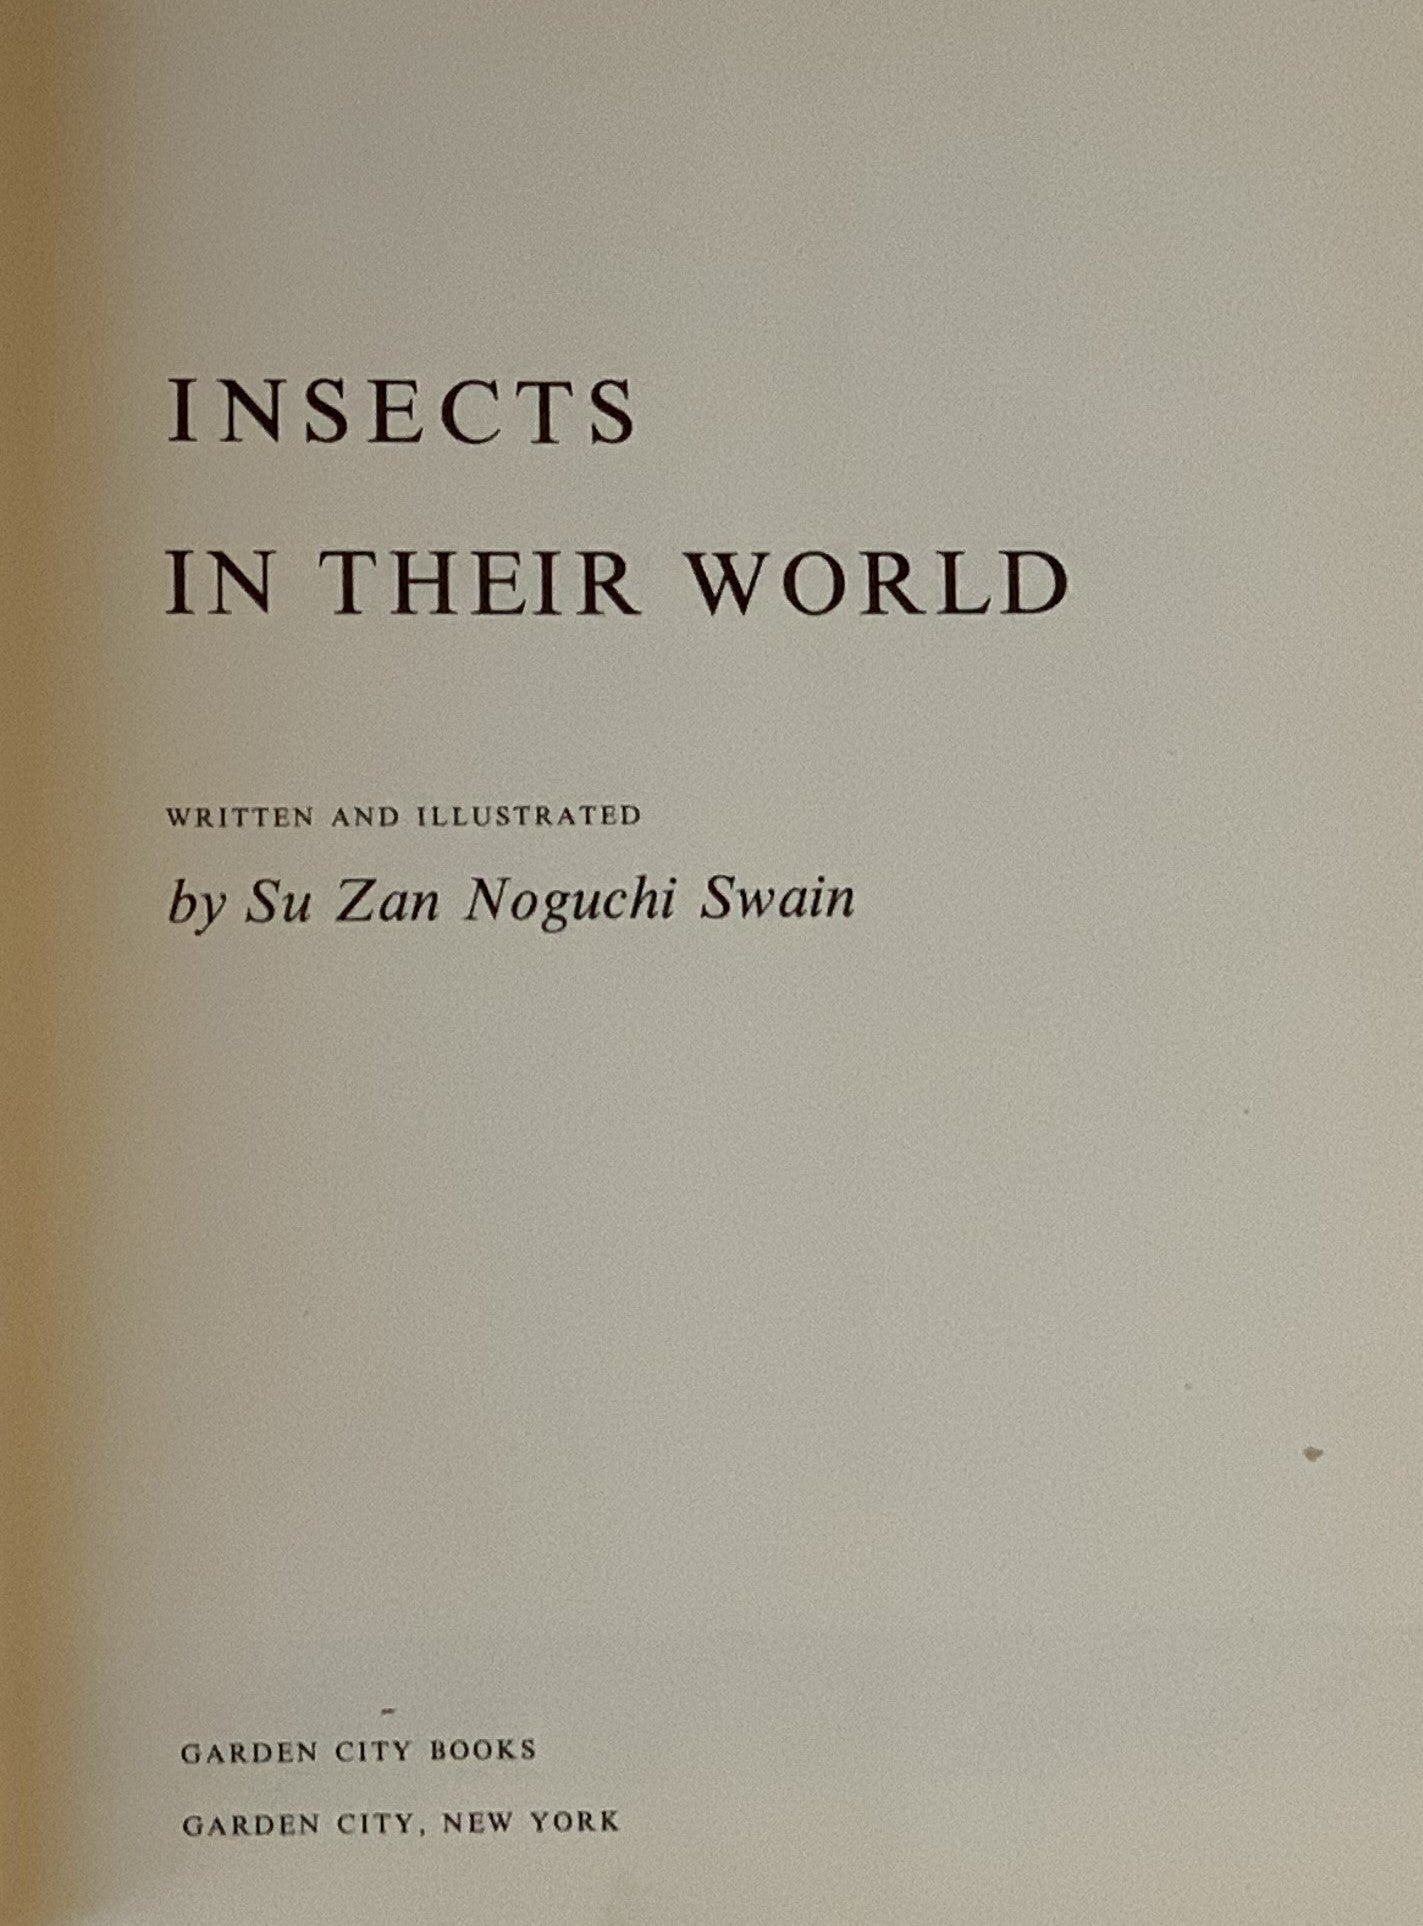 Insects in Their World-Swain : Swain